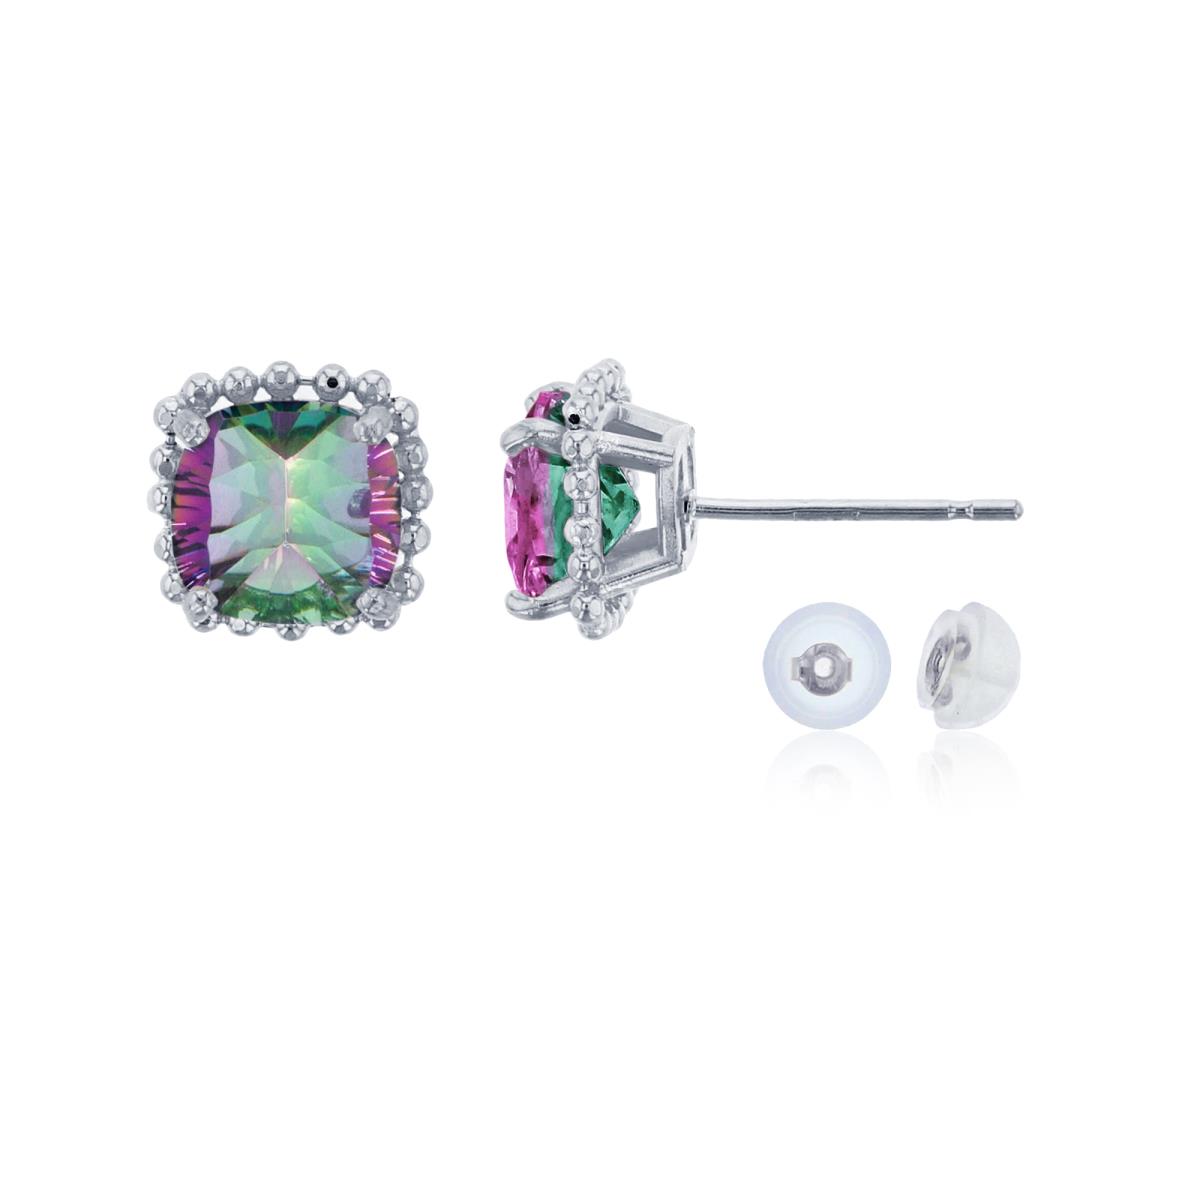 10K White Gold 6x6mm Cushion Cut Mystic Green Topaz Bead Frame Stud Earring with Silicone Back